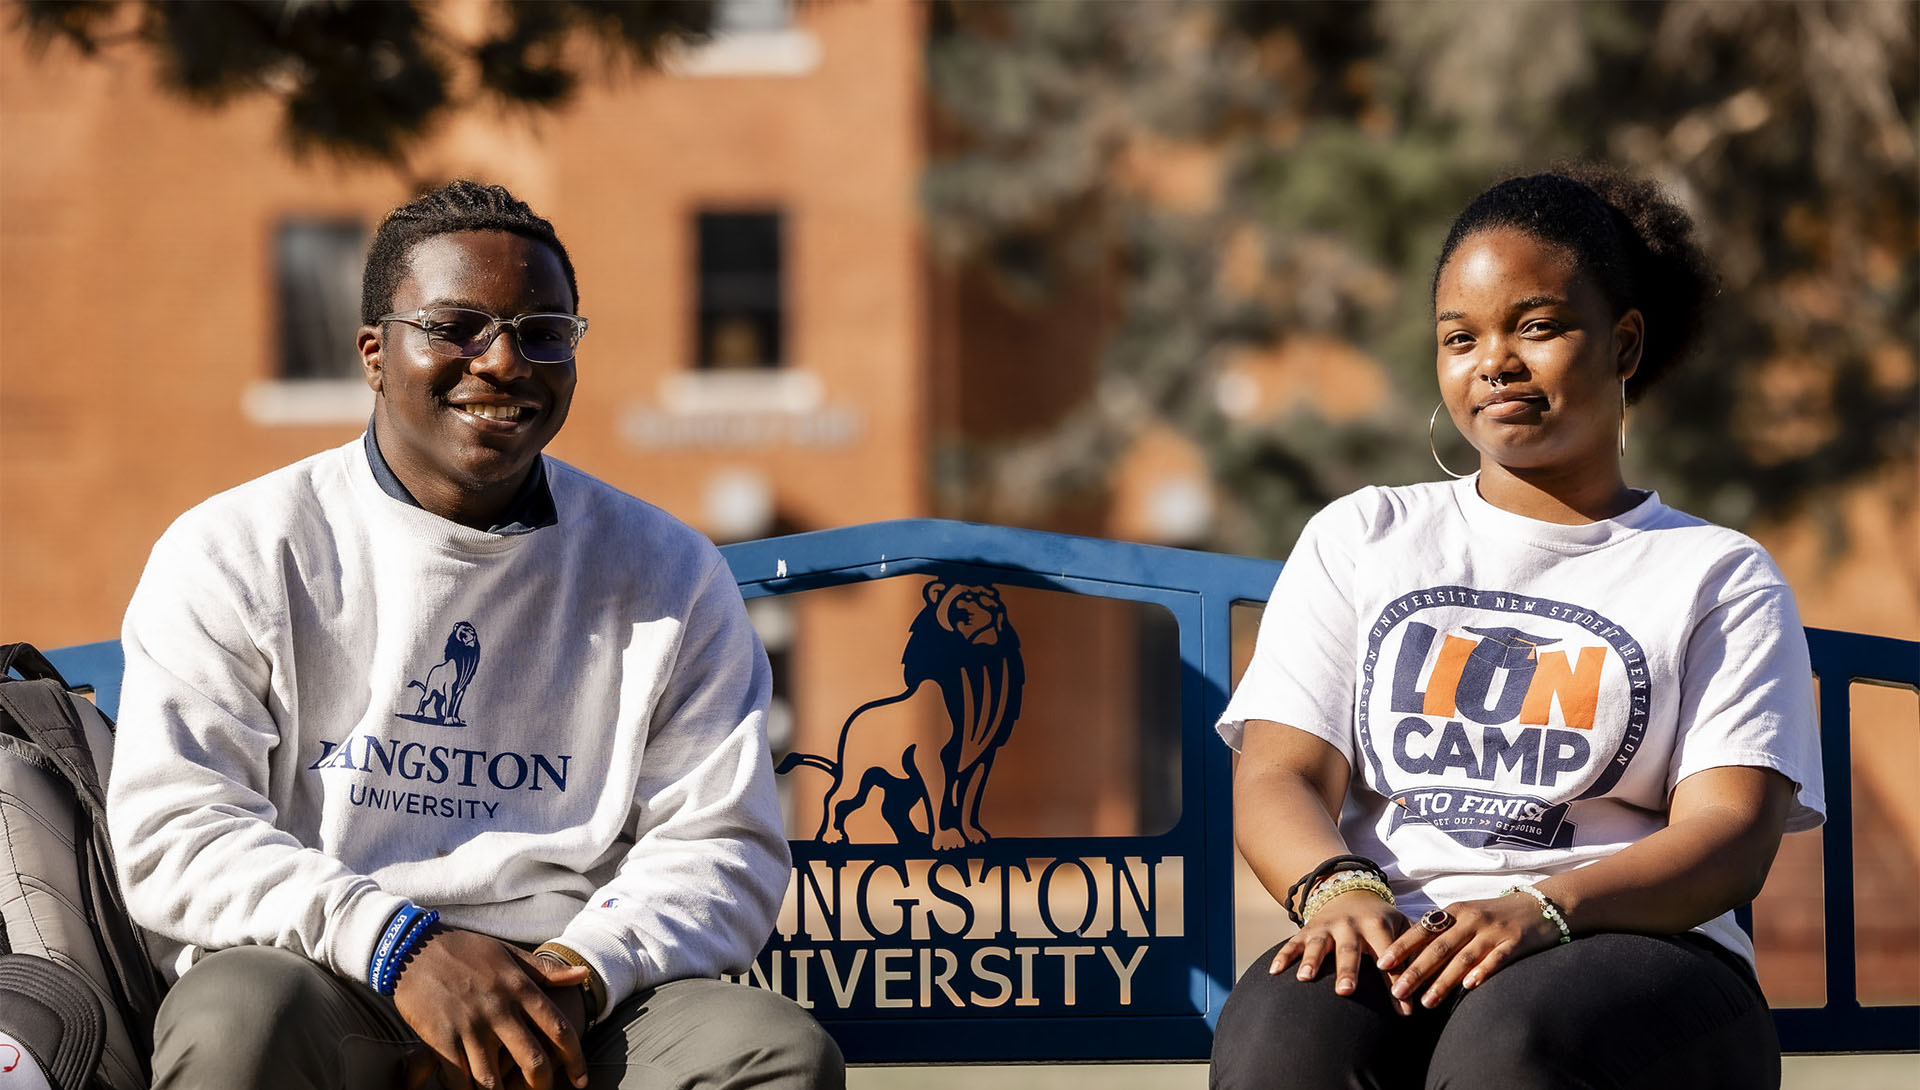 A male and female student in Langston University logo wear sitting on a bench smiling at the camera